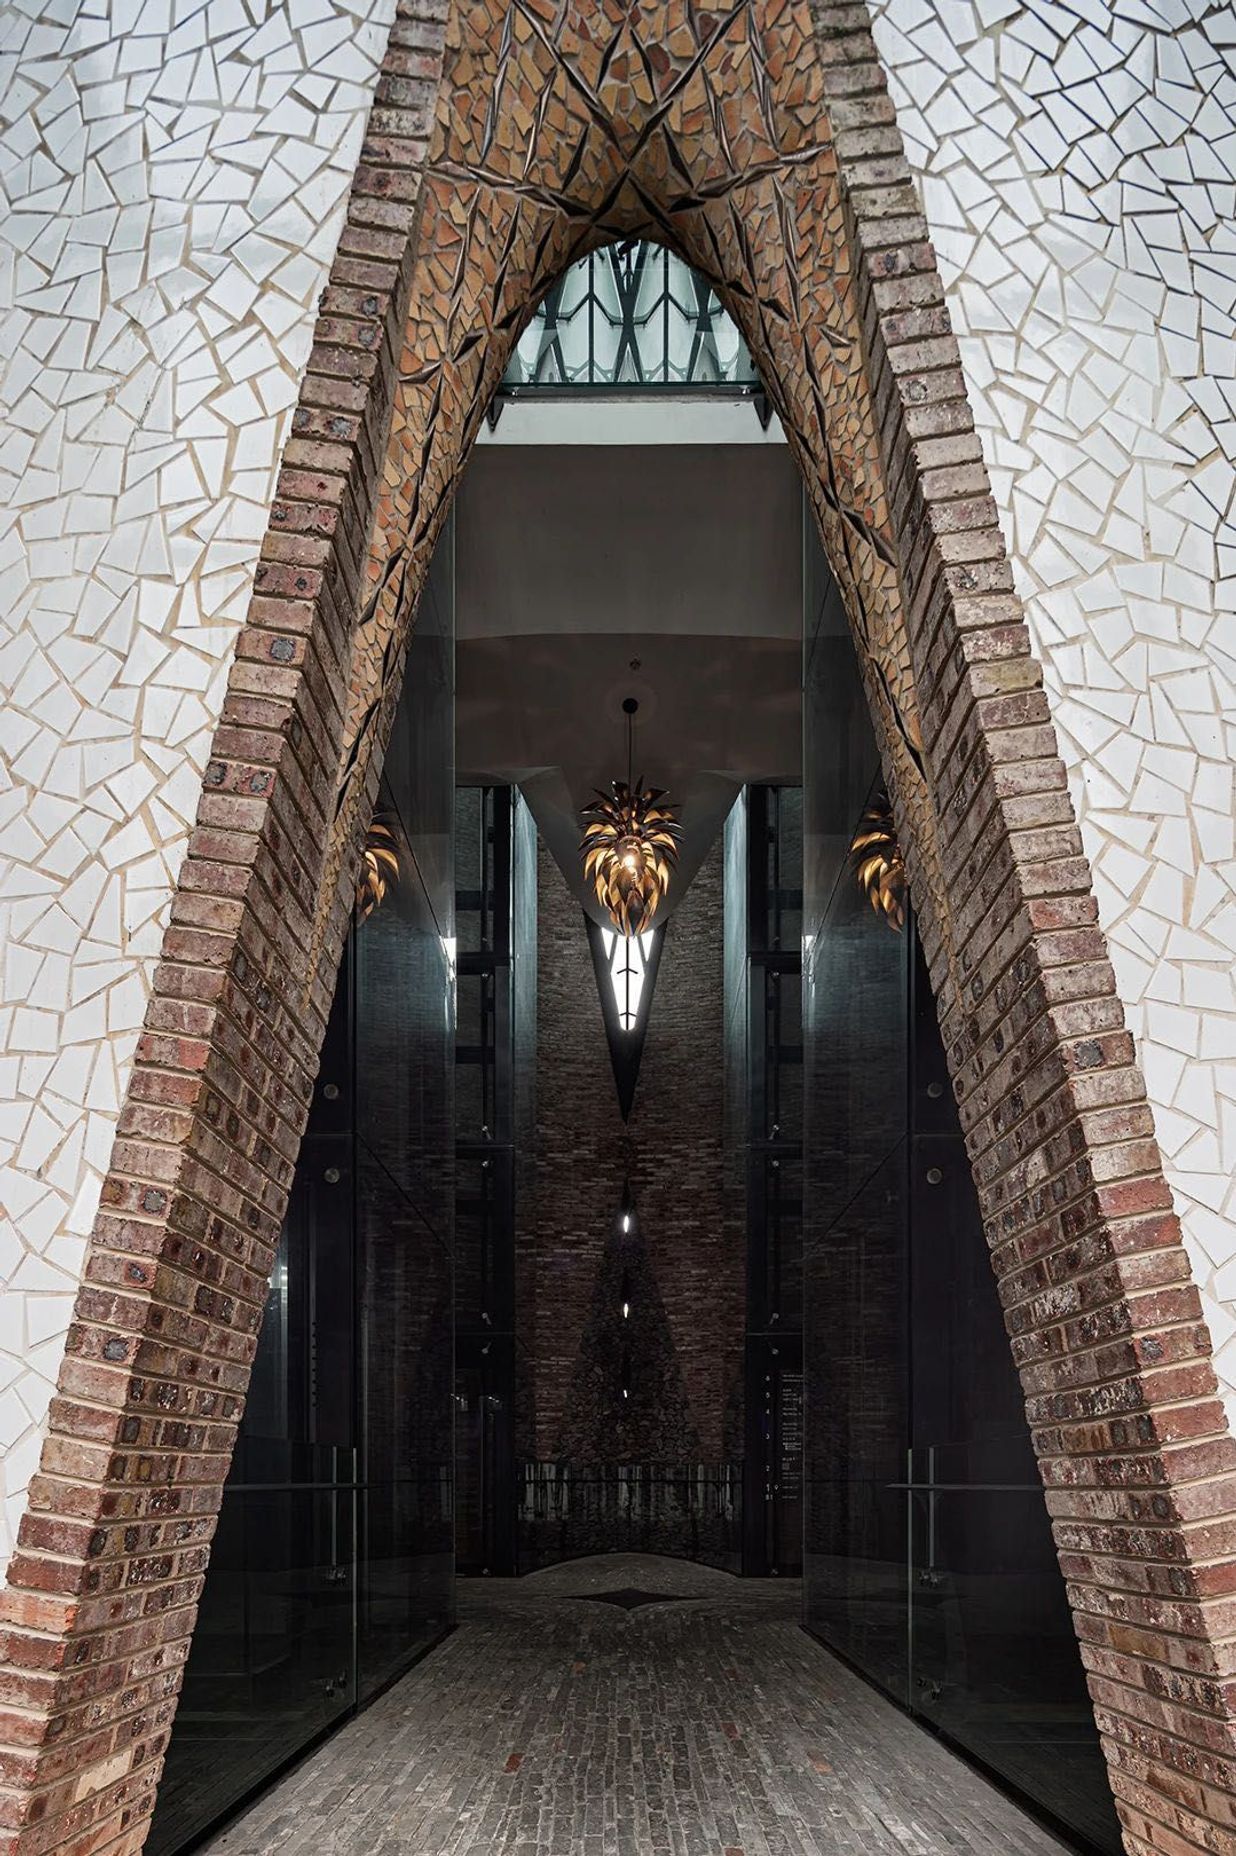 A custom-made Lotus Chandelier hanging in the entrance of the Tower lift shaft.